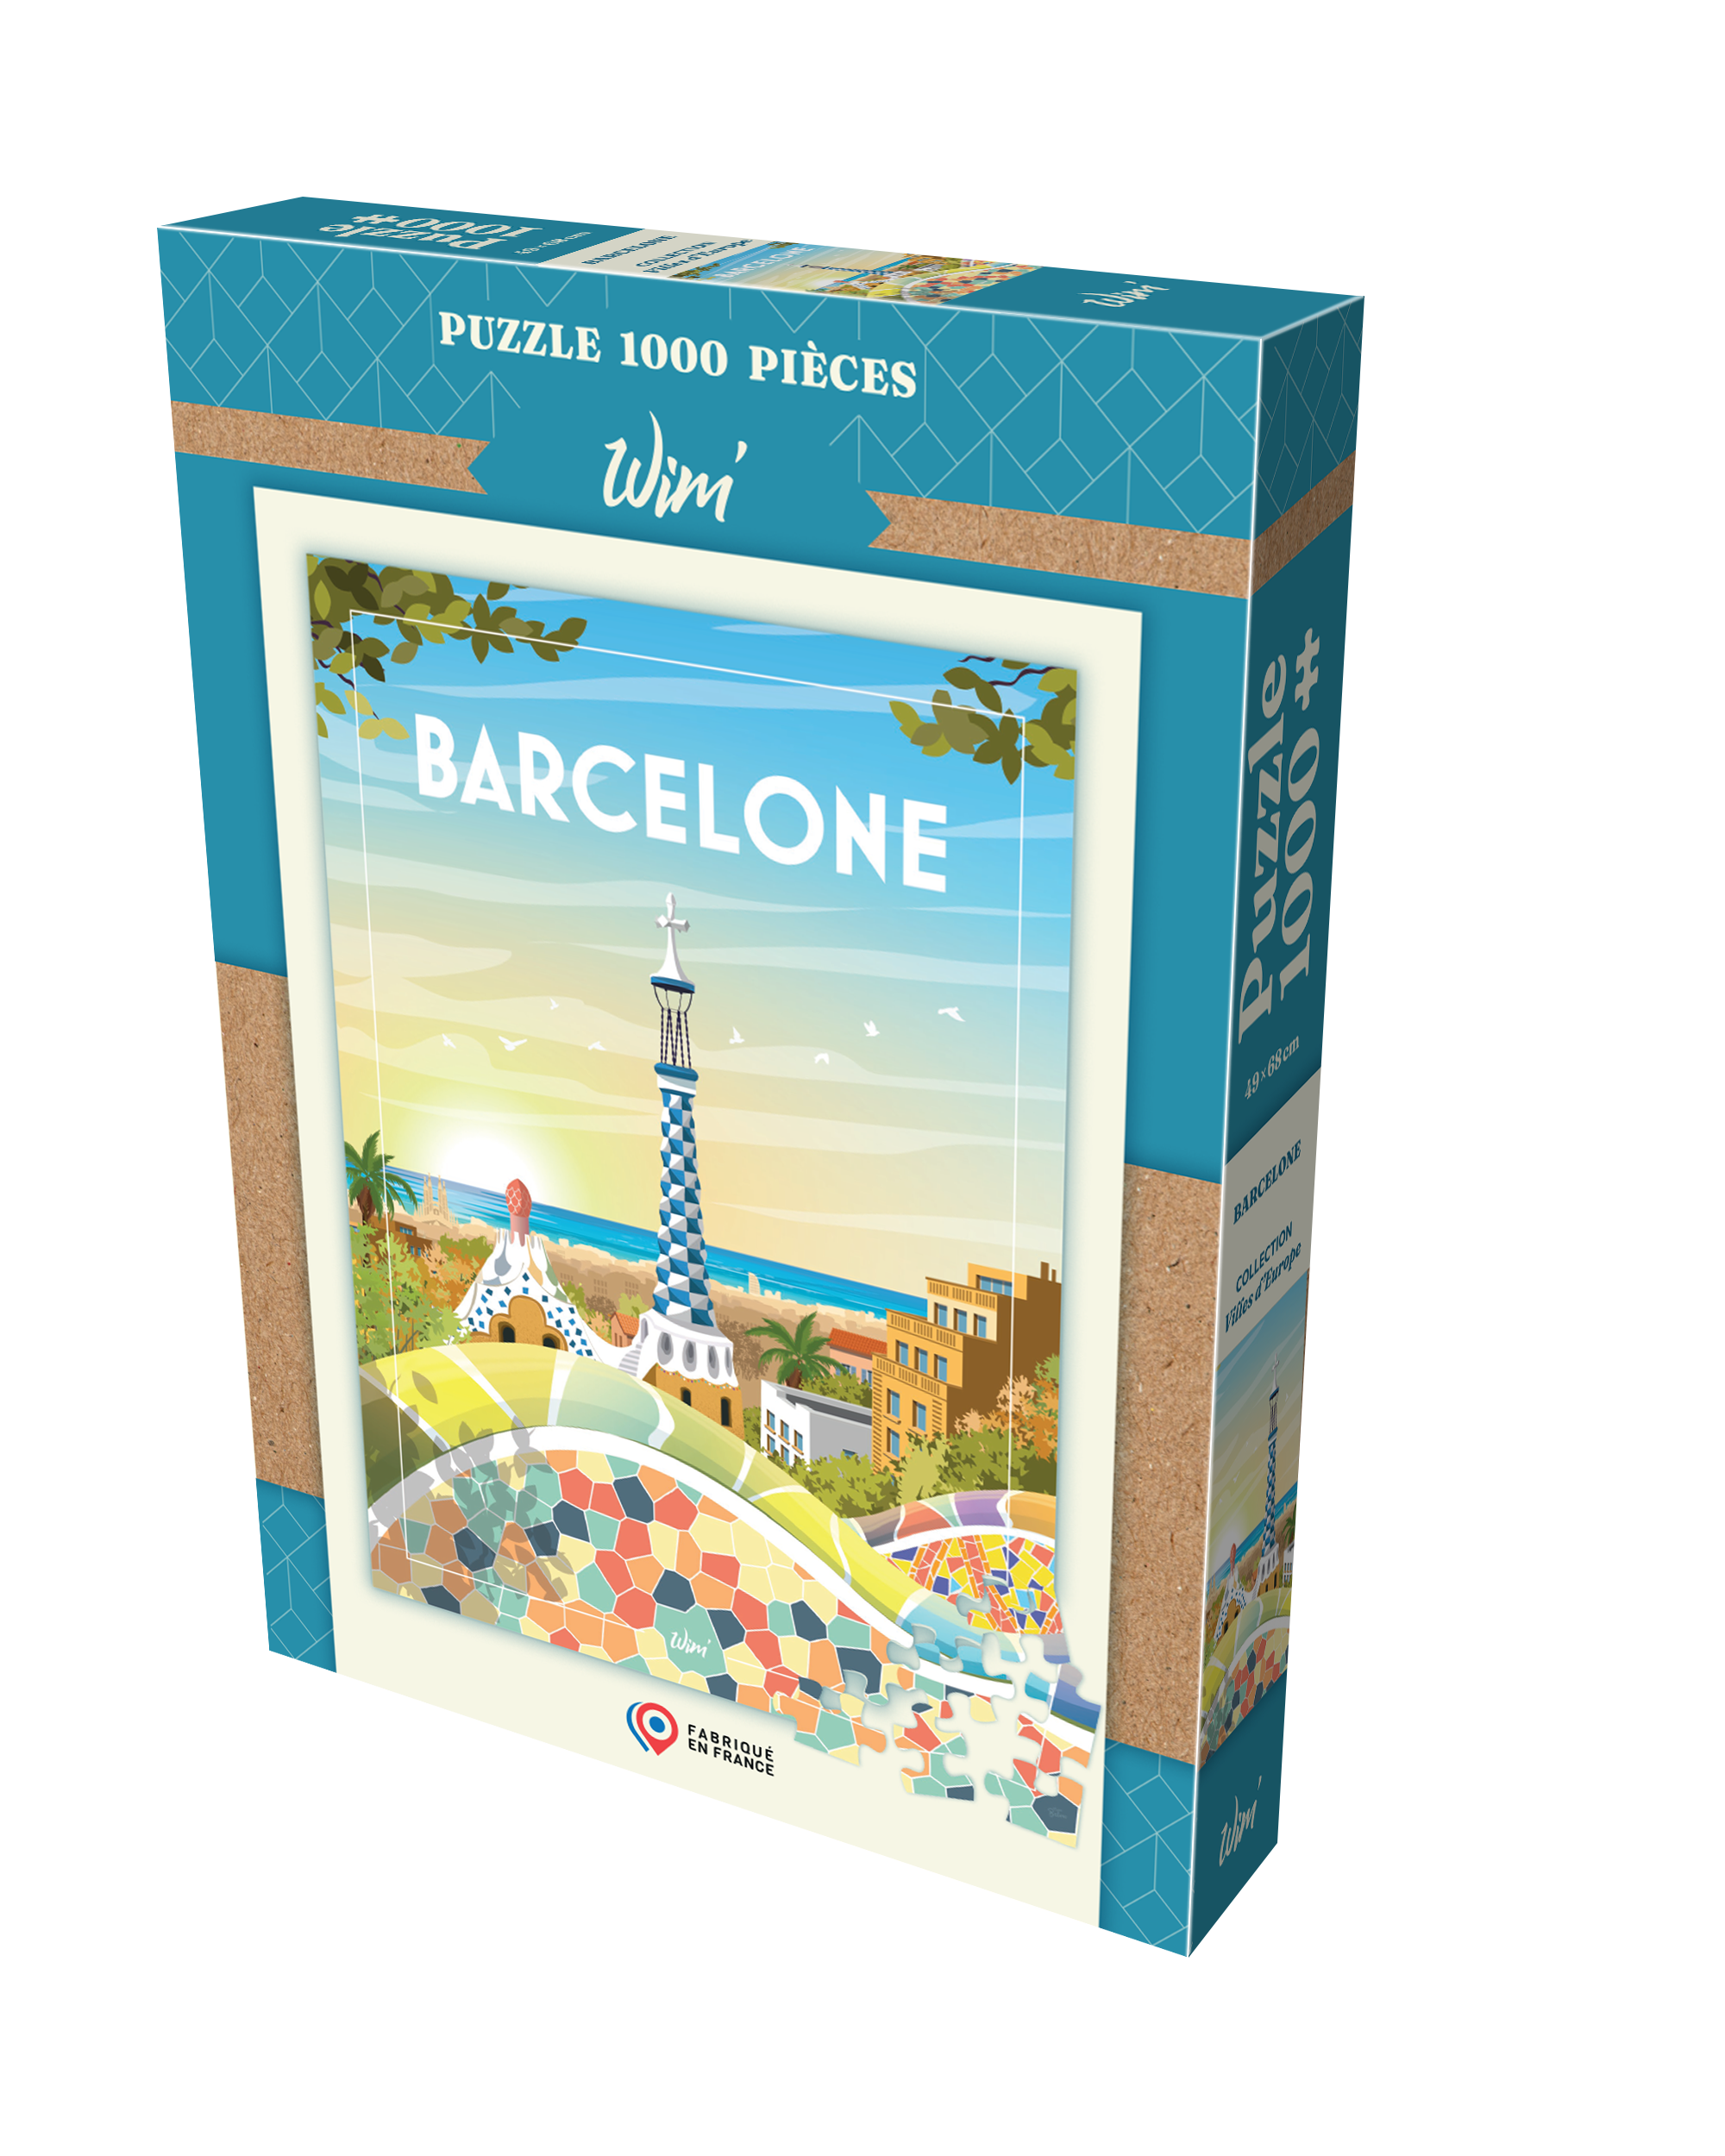 Puzzle Barcelone - Puzzle 1000 pièce Gigamic